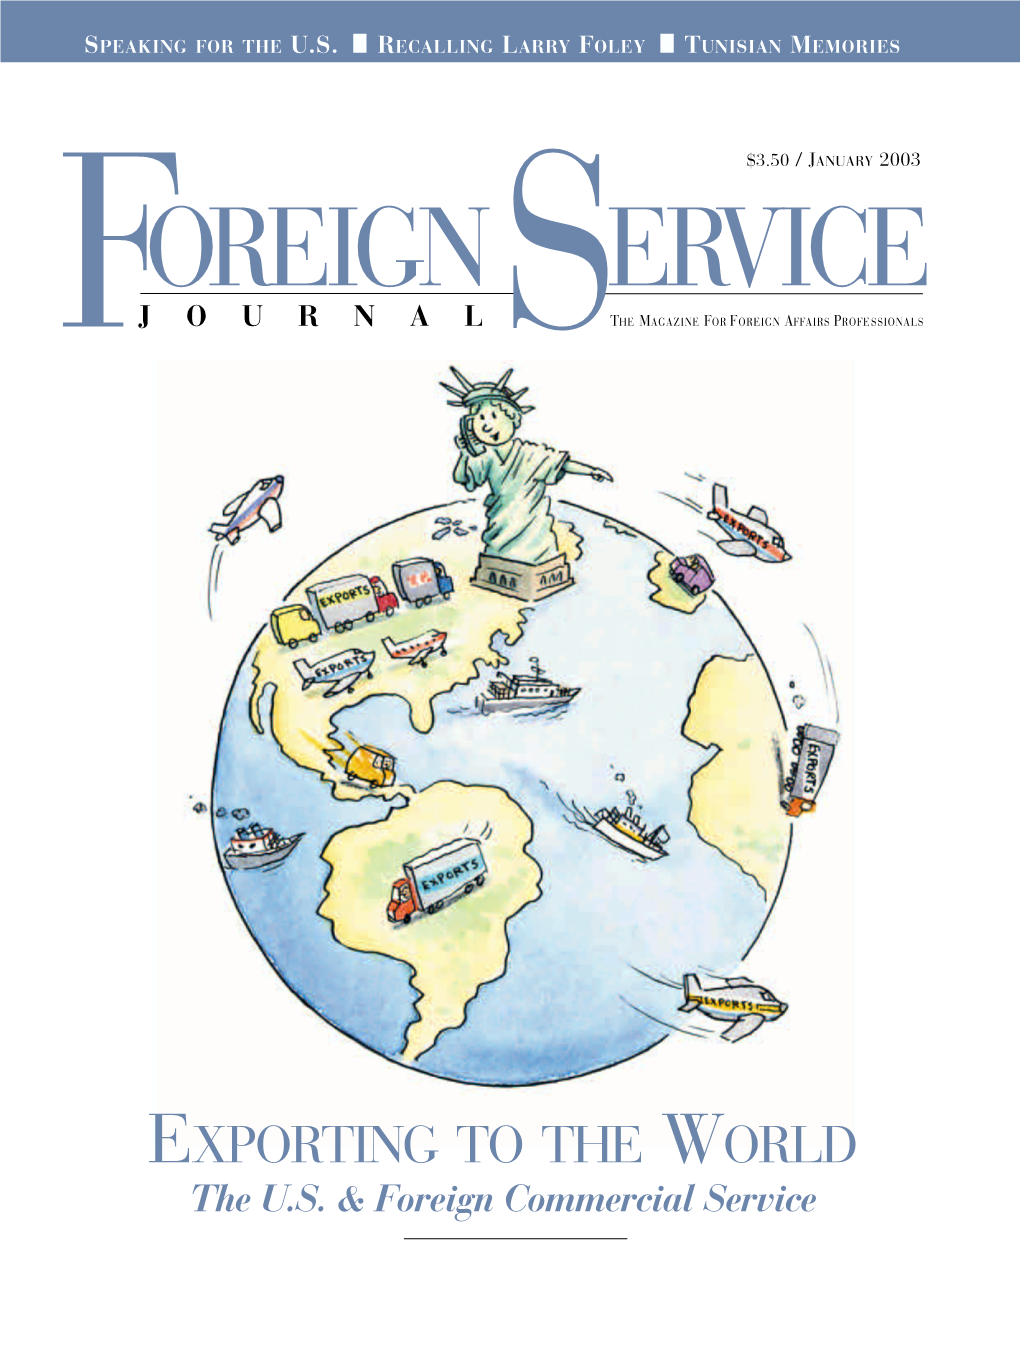 The Foreign Service Journal, January 2003